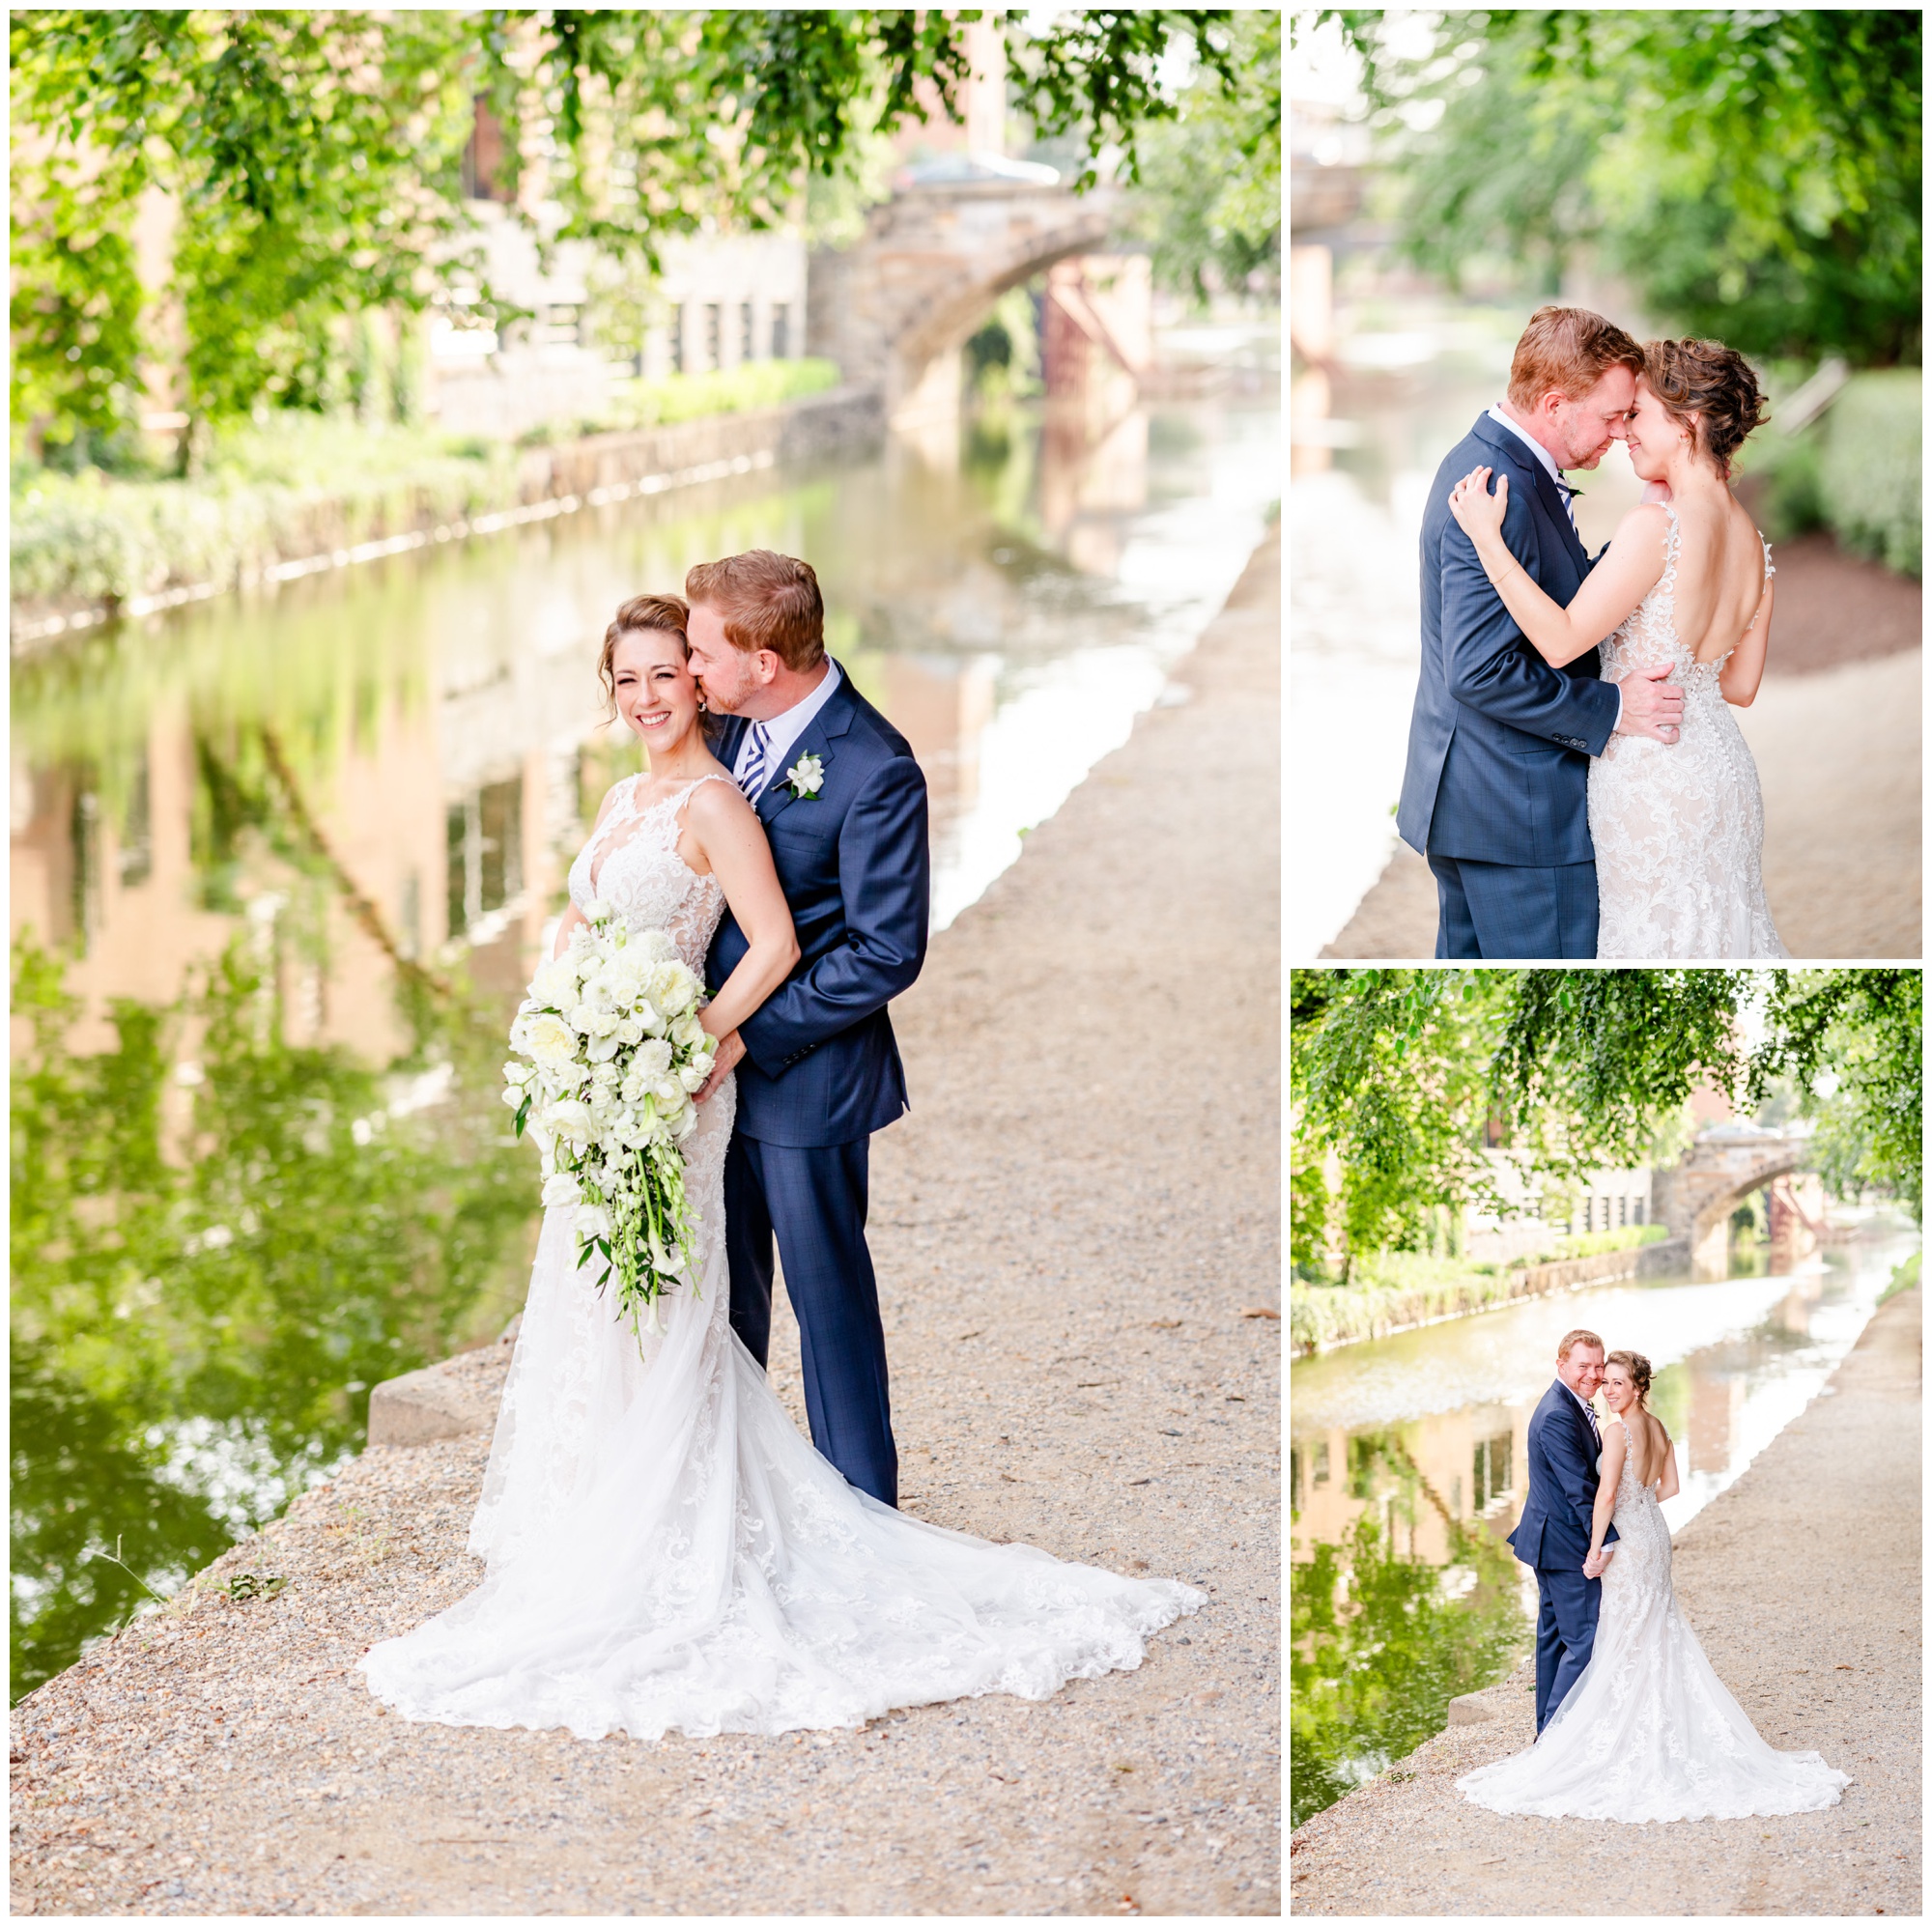 romantic Ritz Carlton Georgetown wedding, summer wedding aesthetic, green and white aesthetic, summer D.C. wedding, D.C. wedding venues, Ritz Carlton wedding, Washington D.C. wedding, romantic wedding aesthetic, Georgetown wedding, Rachel E.H. Photography, D.C. photographer, groom kissing brides cheek, couple touching foreheads, couple beside canal